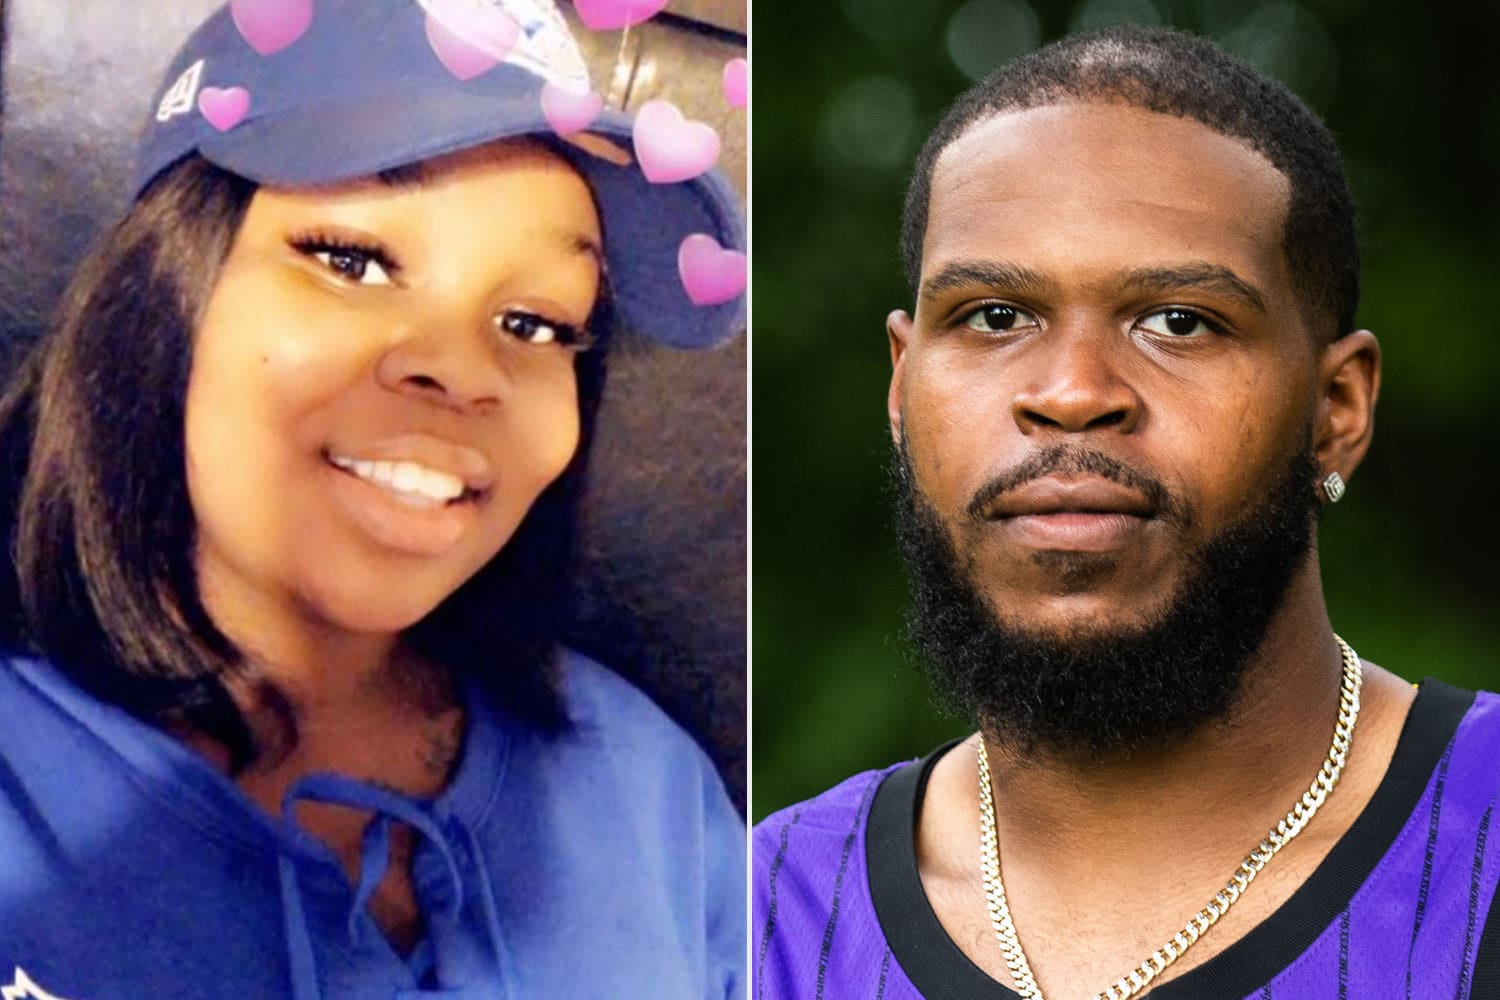 Breonna Taylor's Boyfriend, Kenneth Walker, Has Something To Say About The Night She Was Killed